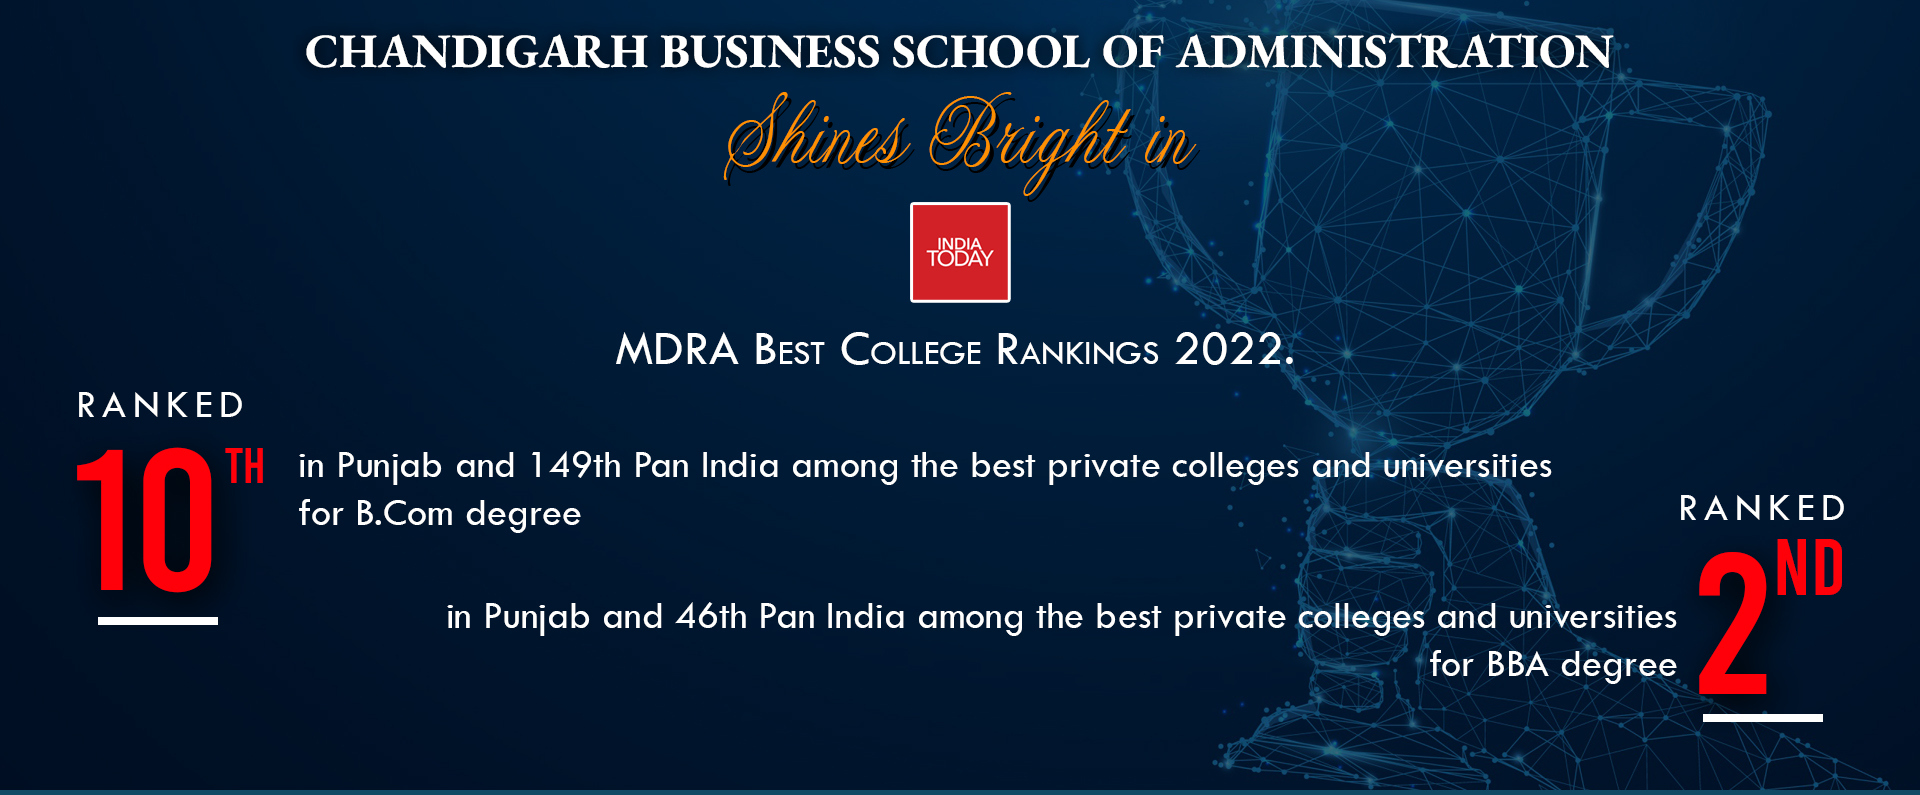 Chandigarh Business School of Administration Shines Yet Again 